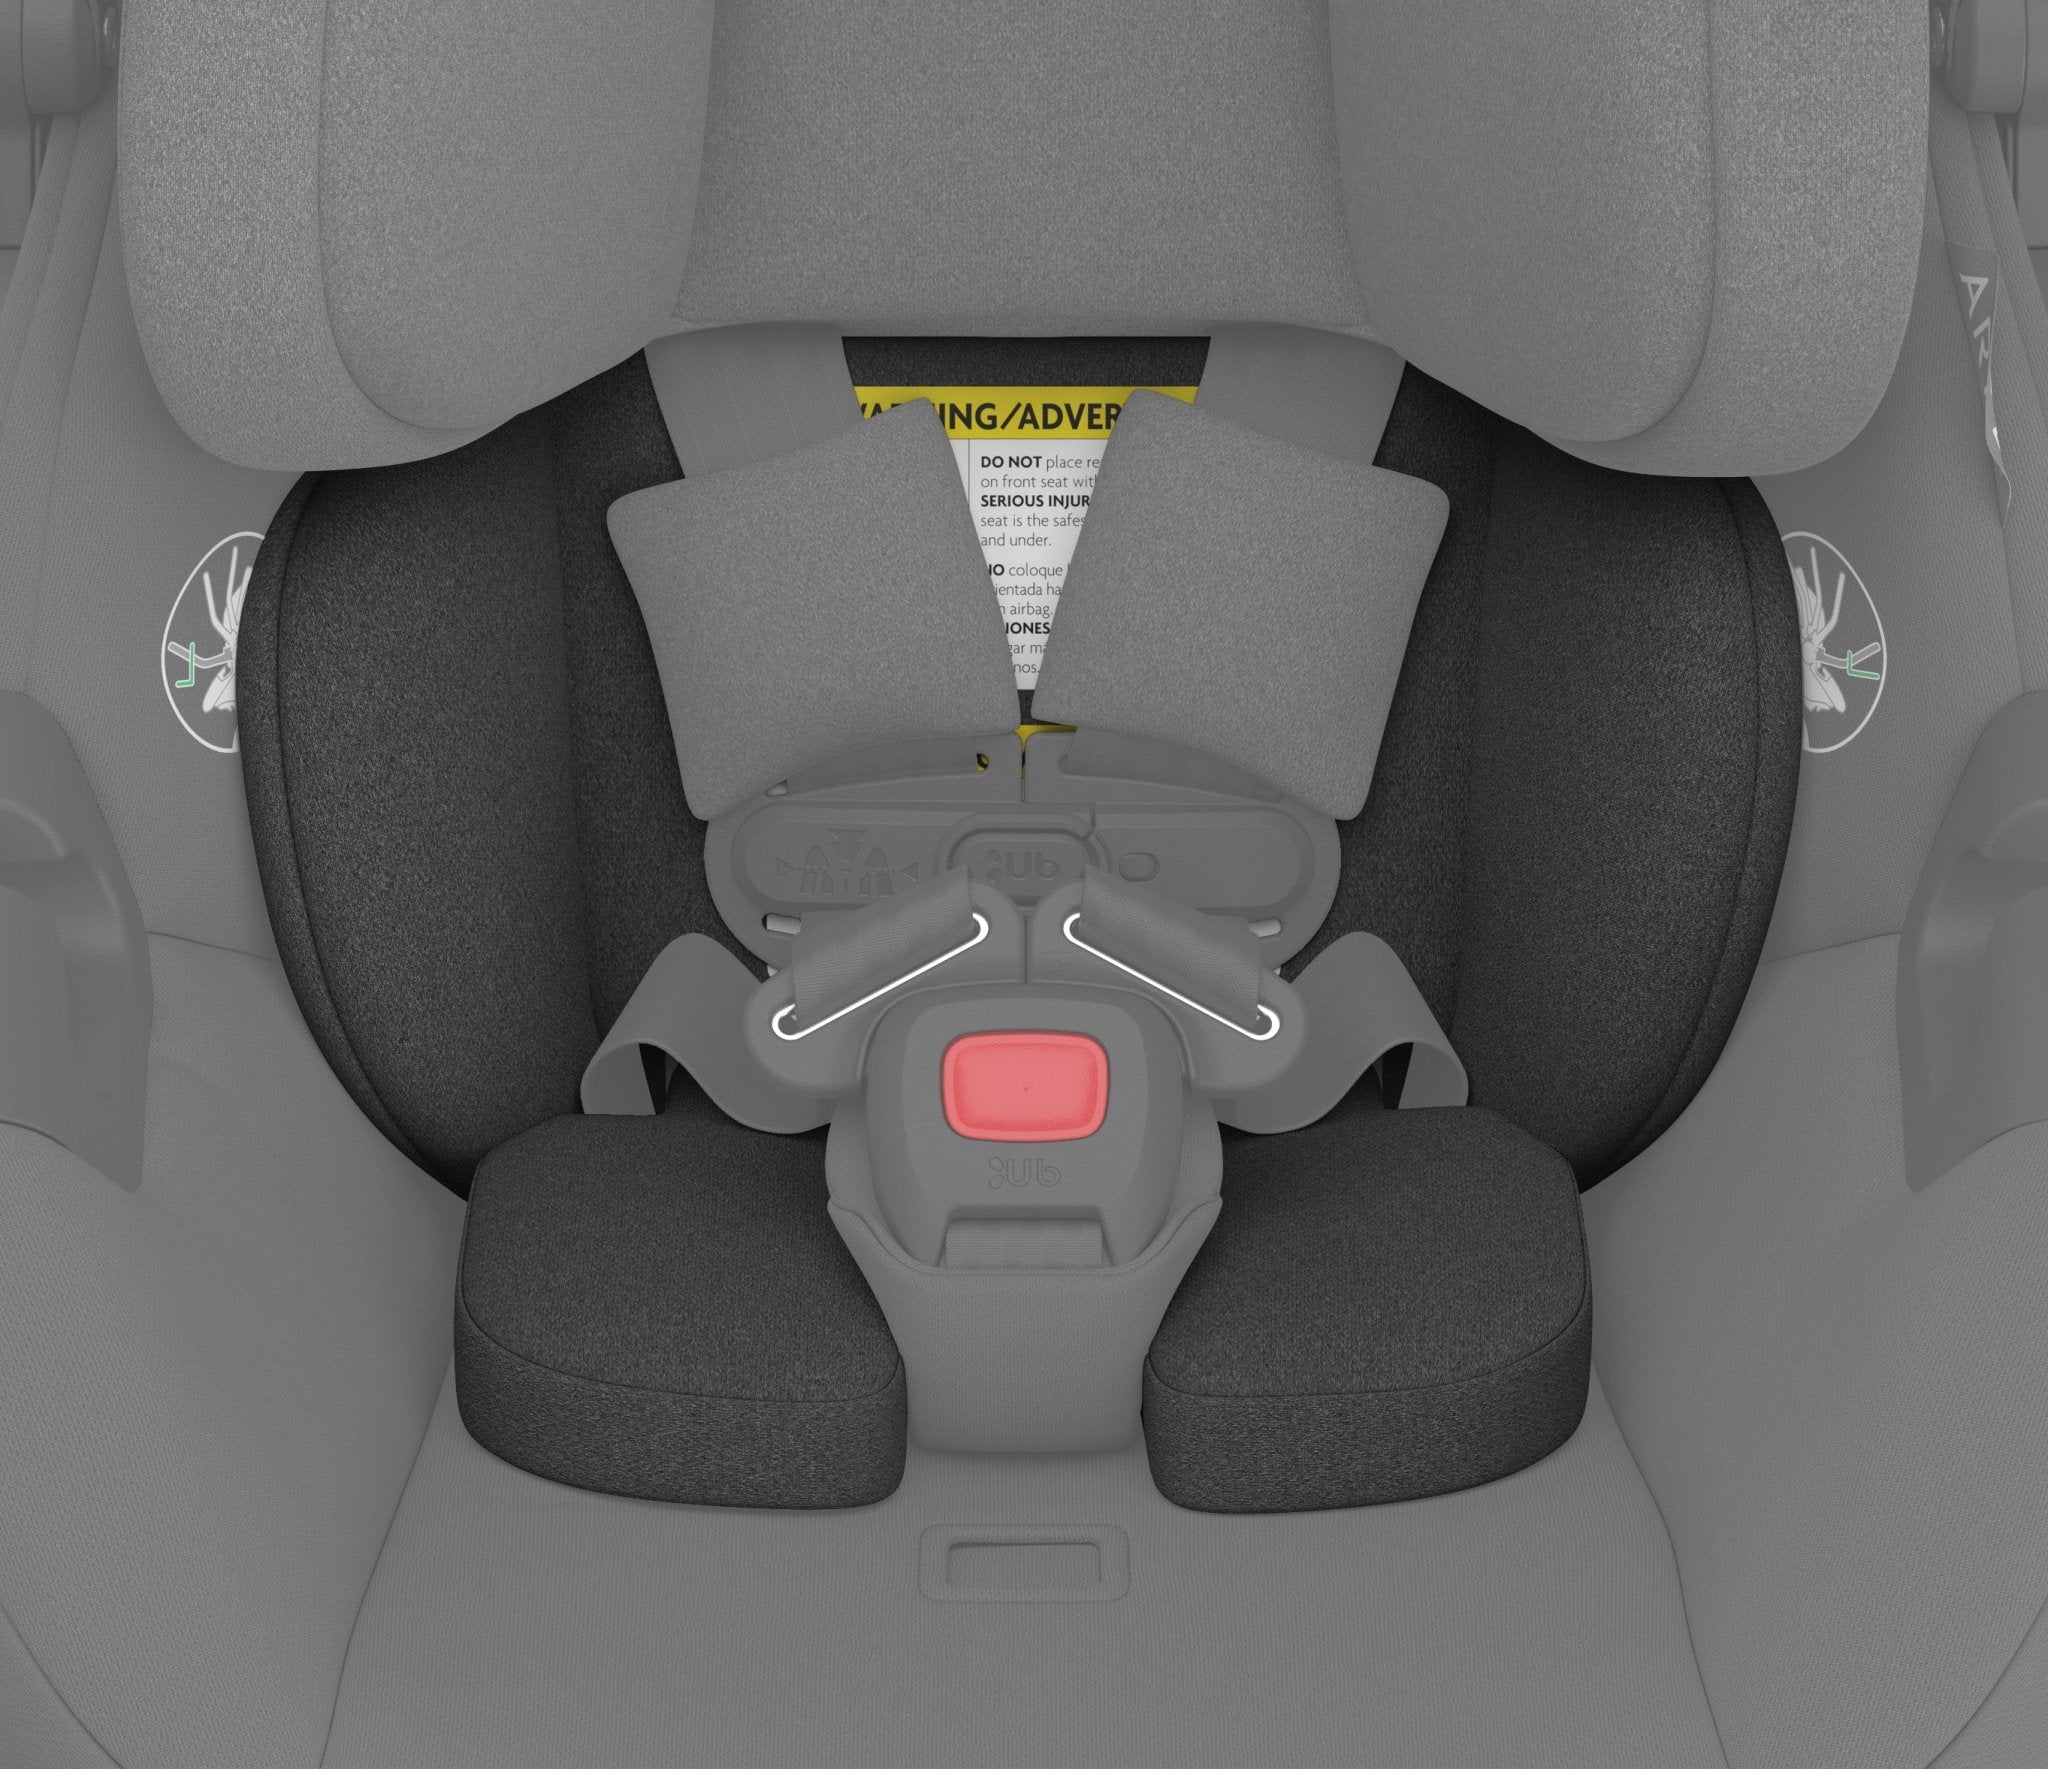 UPPAbaby ARIA Infant Car Seat - ANB Baby -810129596083$300 - $500